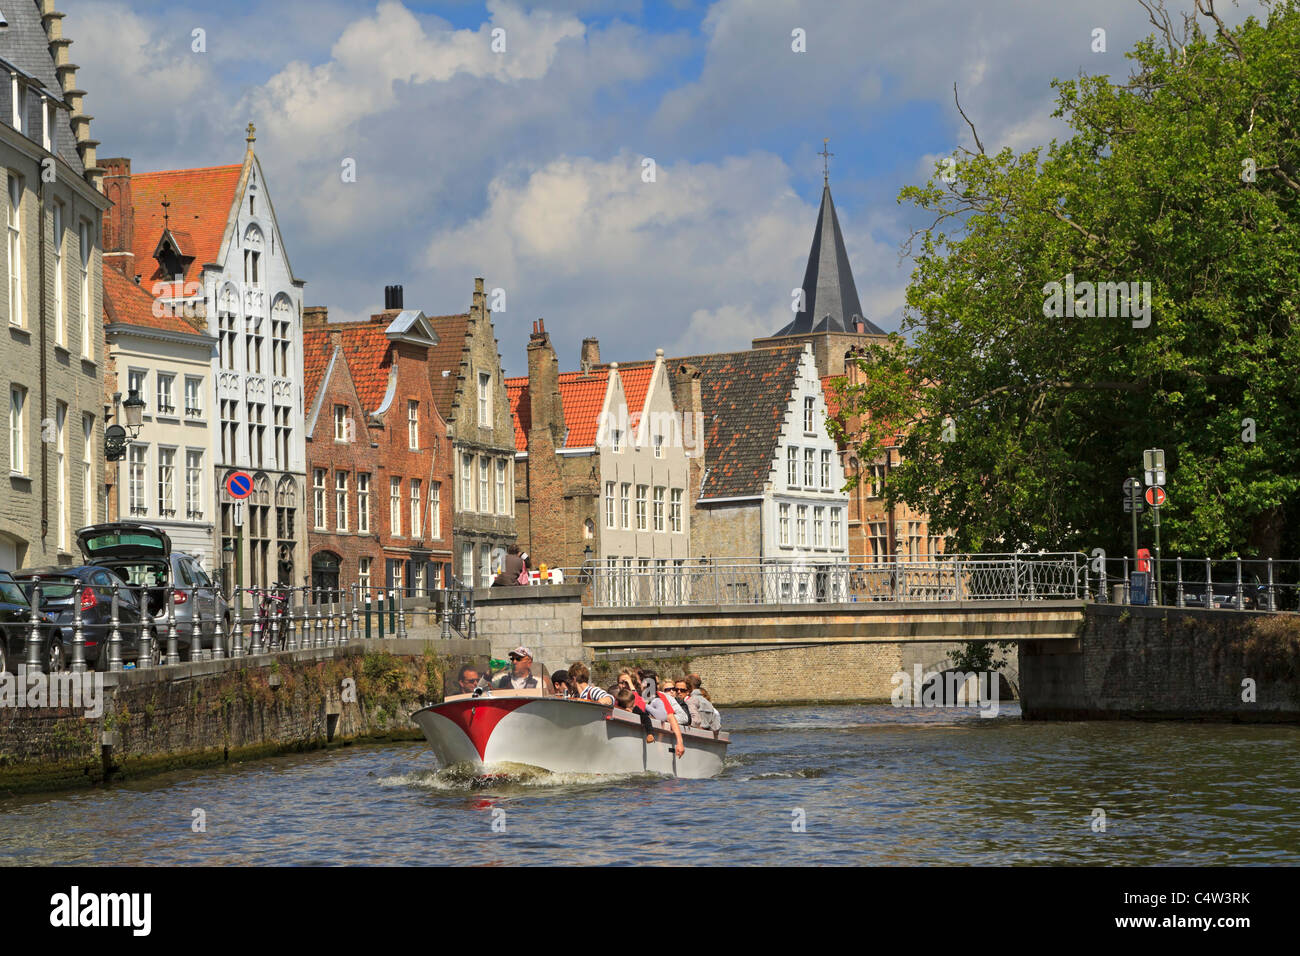 Verversdijk, Bruges, Belgium. Tourist enjoy a tour of the canal in a sightseeing boat. Stock Photo